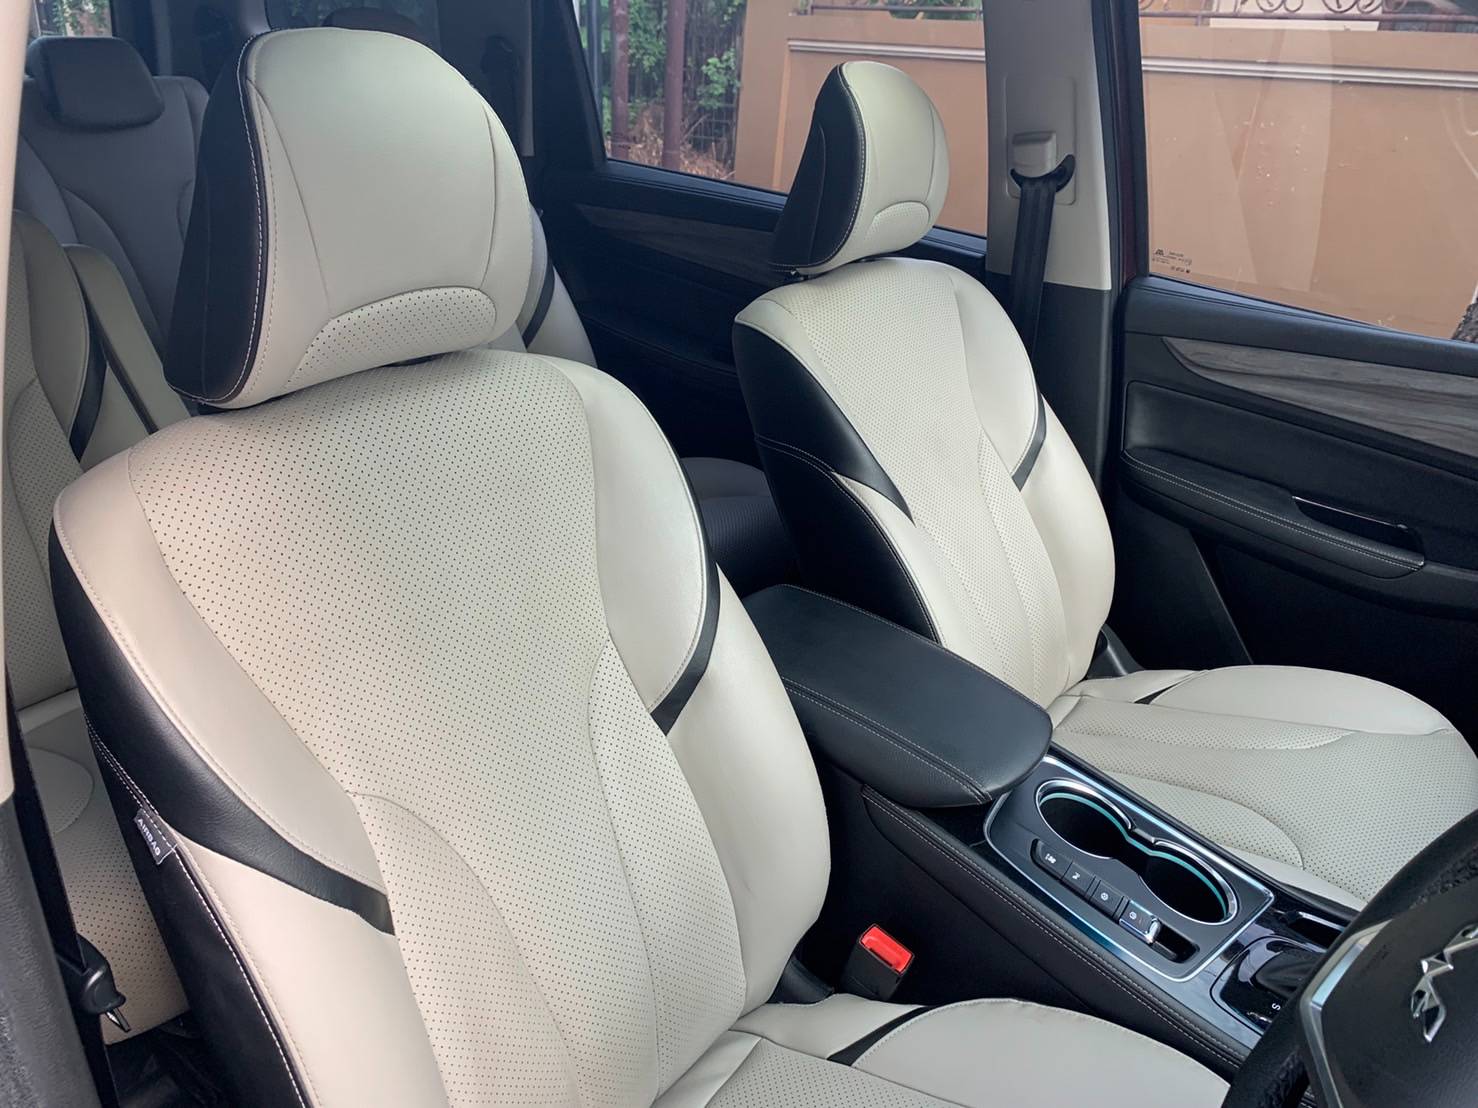 Used 2019 Wuling Cortez 1.5 L TURBO AT LUX+ 1.5 L TURBO AT LUX+ for sale